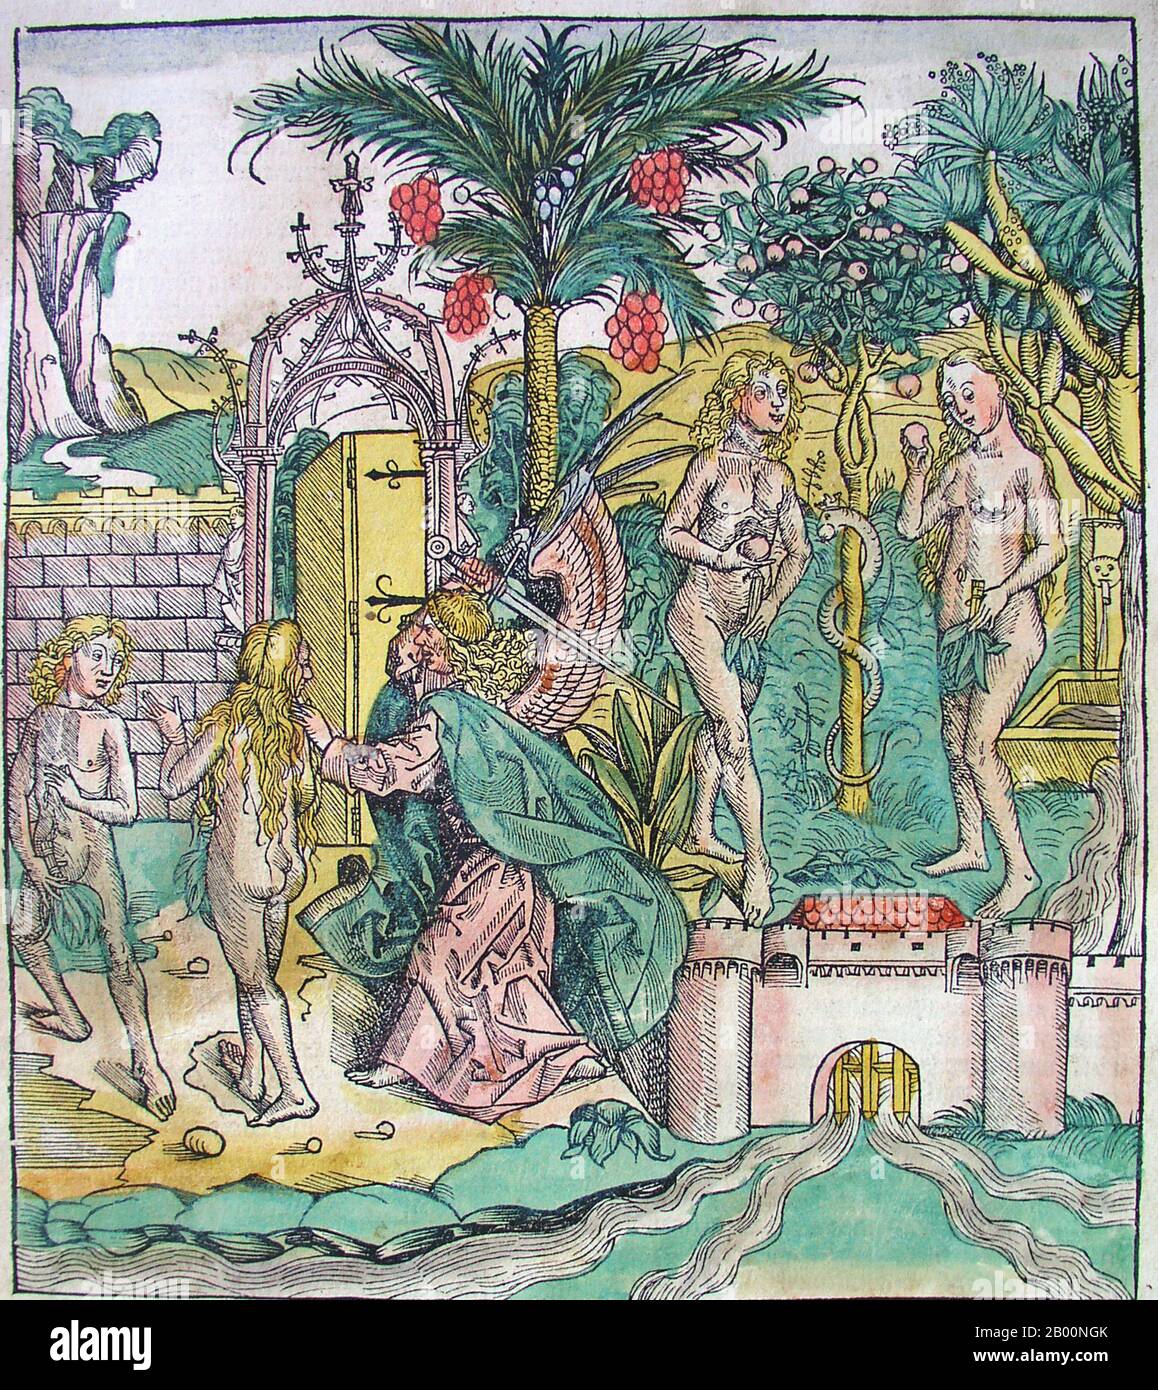 Germany: 'Expulsion from the Garden of Eden'. The Nuremberg Chronicle, by Hartmann Schedel (1440-1514), 1493.  The Nuremberg Chronicle is an illustrated world history. Its structure follows the story of human history as related in the Bible, including the histories of a number of important Western cities. Written in Latin by Hartmann Schedel, with a version in German translation by Georg Alt, it appeared in 1493. It is one of the best-documented early printed books. It is classified as an incunabulum, a book, pamphlet, or broadside that was printed (not handwritten) before the year 1501. Stock Photo